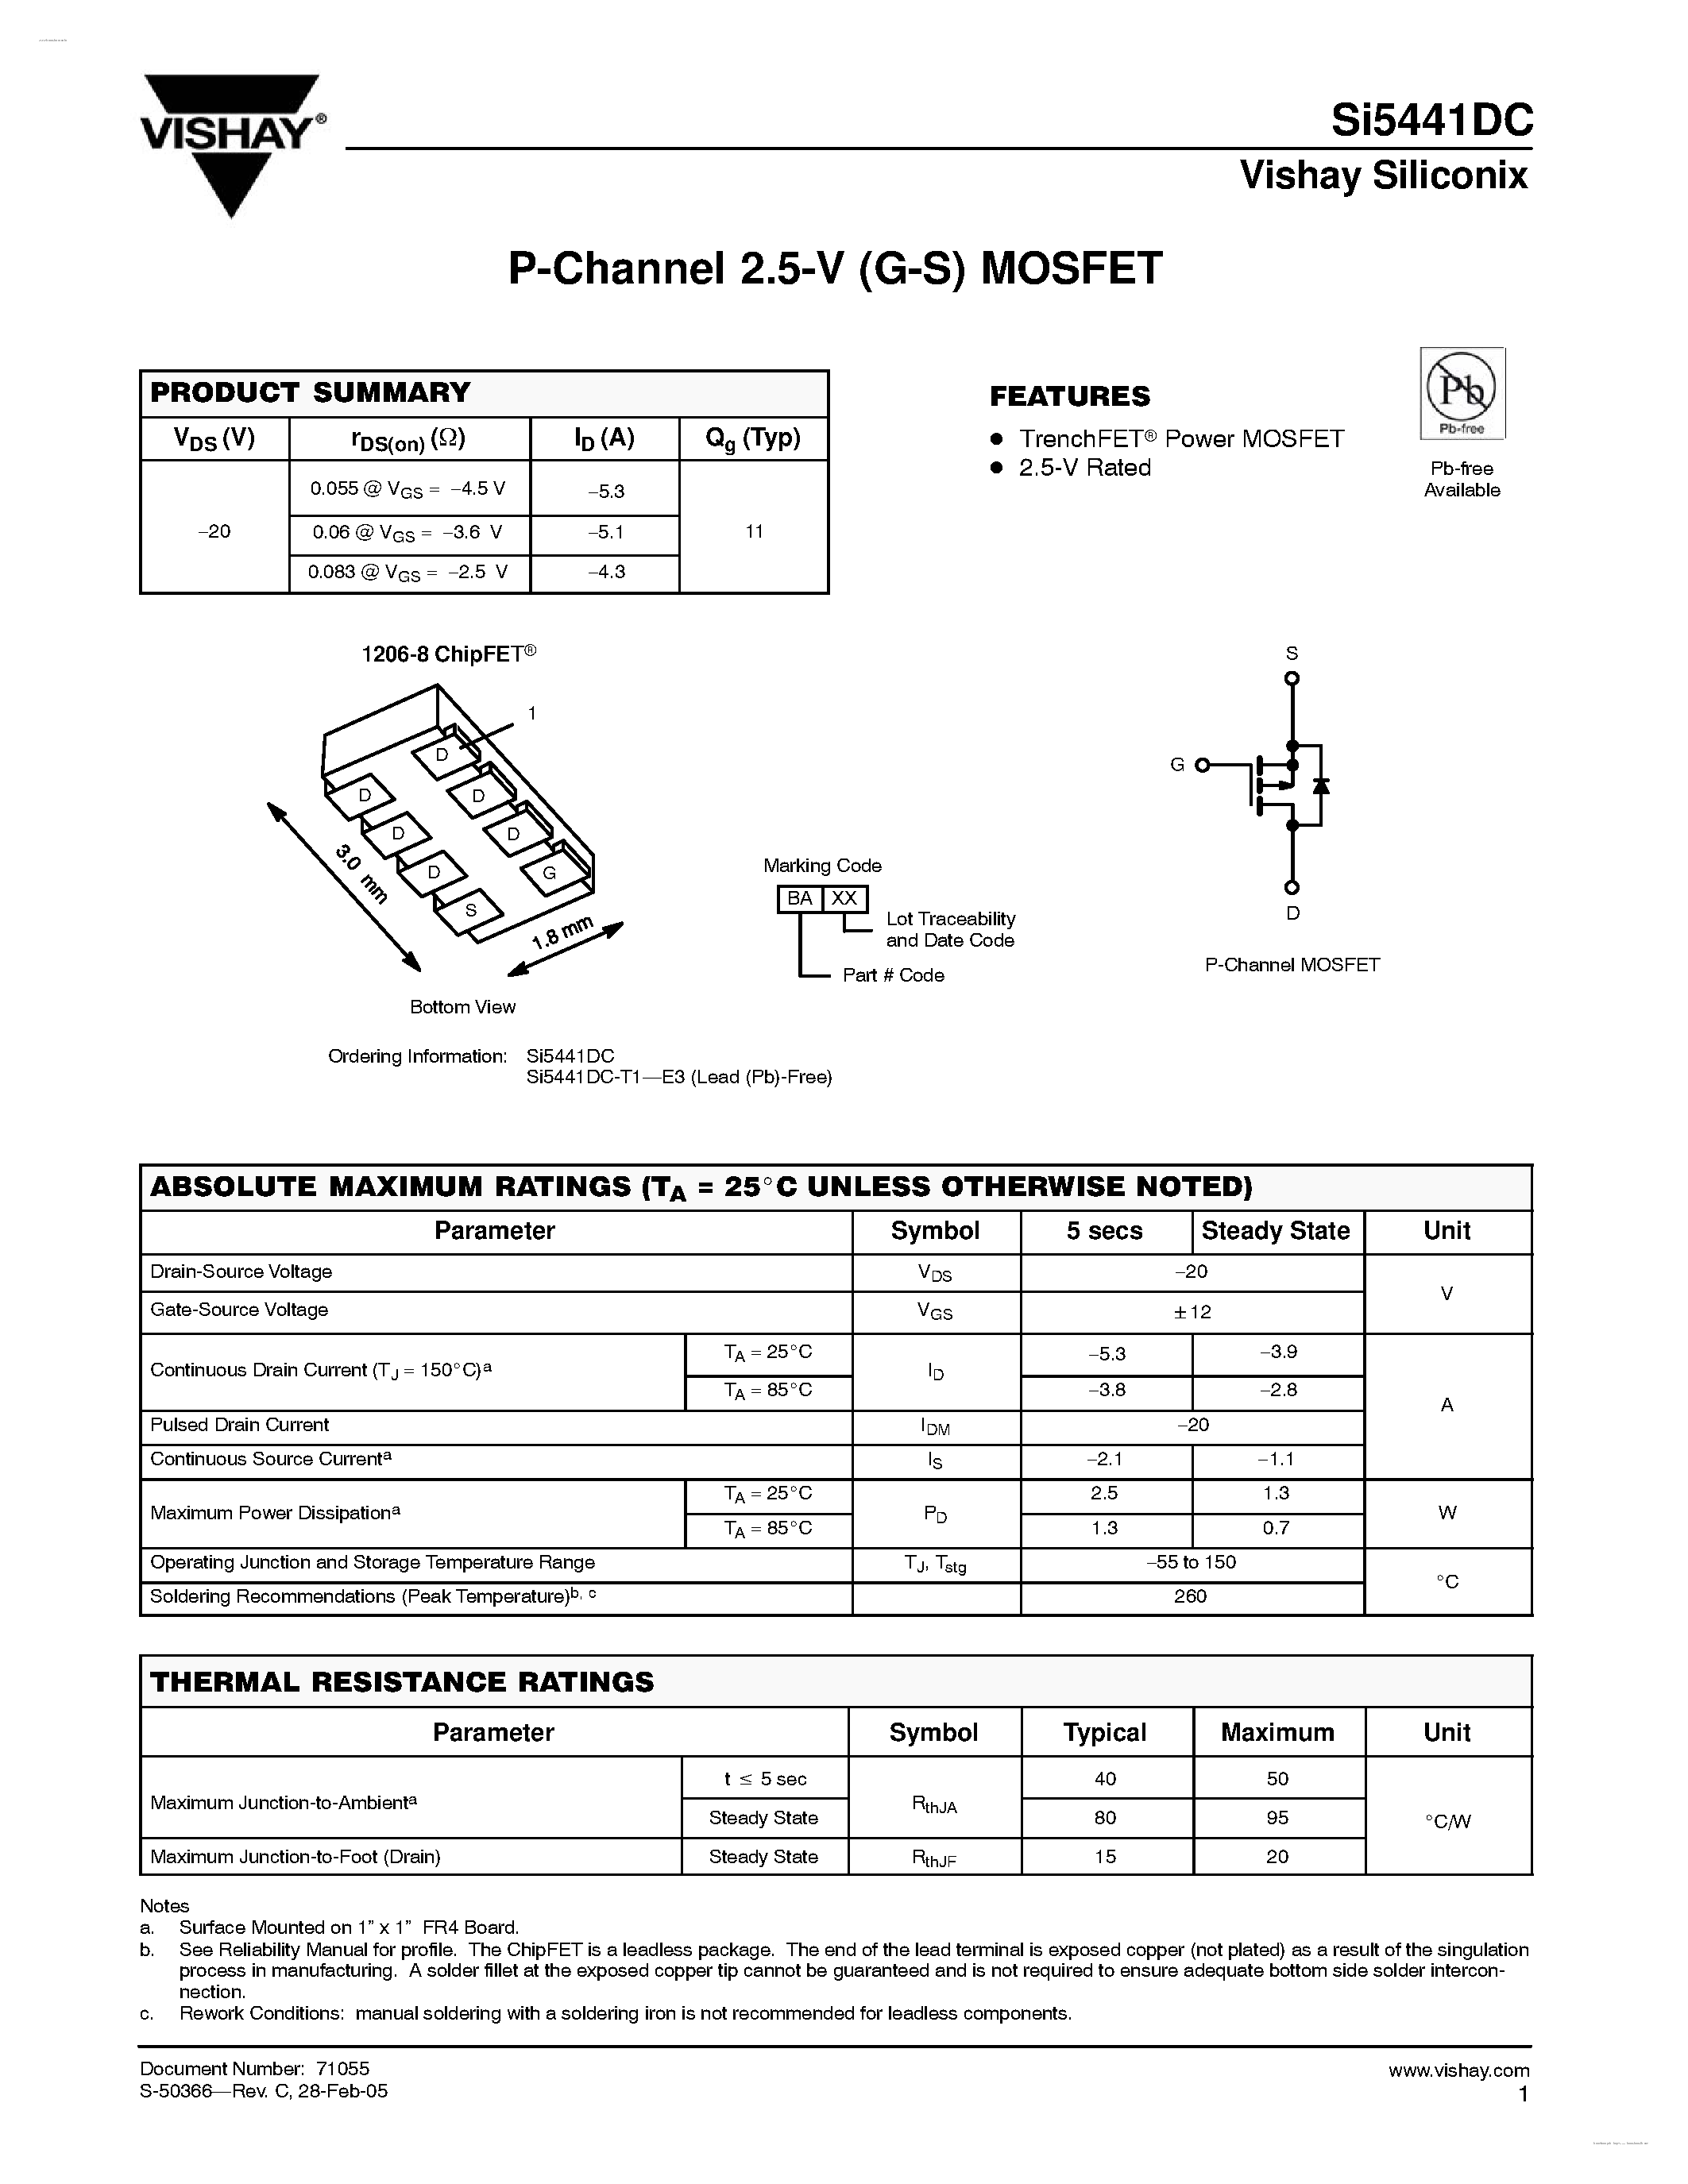 Даташит SI5441DC - P-Channel 2.5-V (G-S) MOSFET страница 1